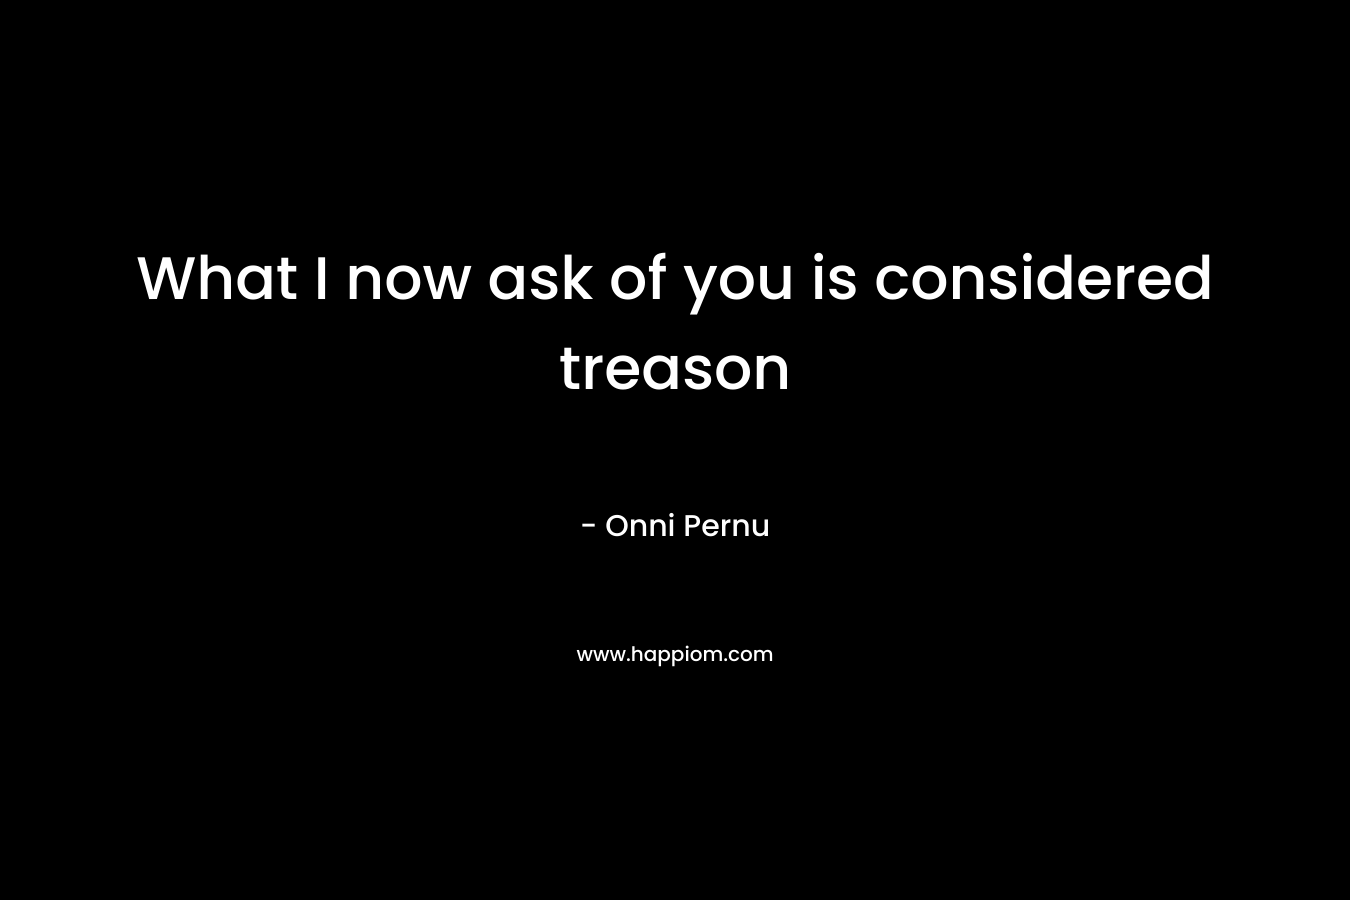 What I now ask of you is considered treason – Onni Pernu